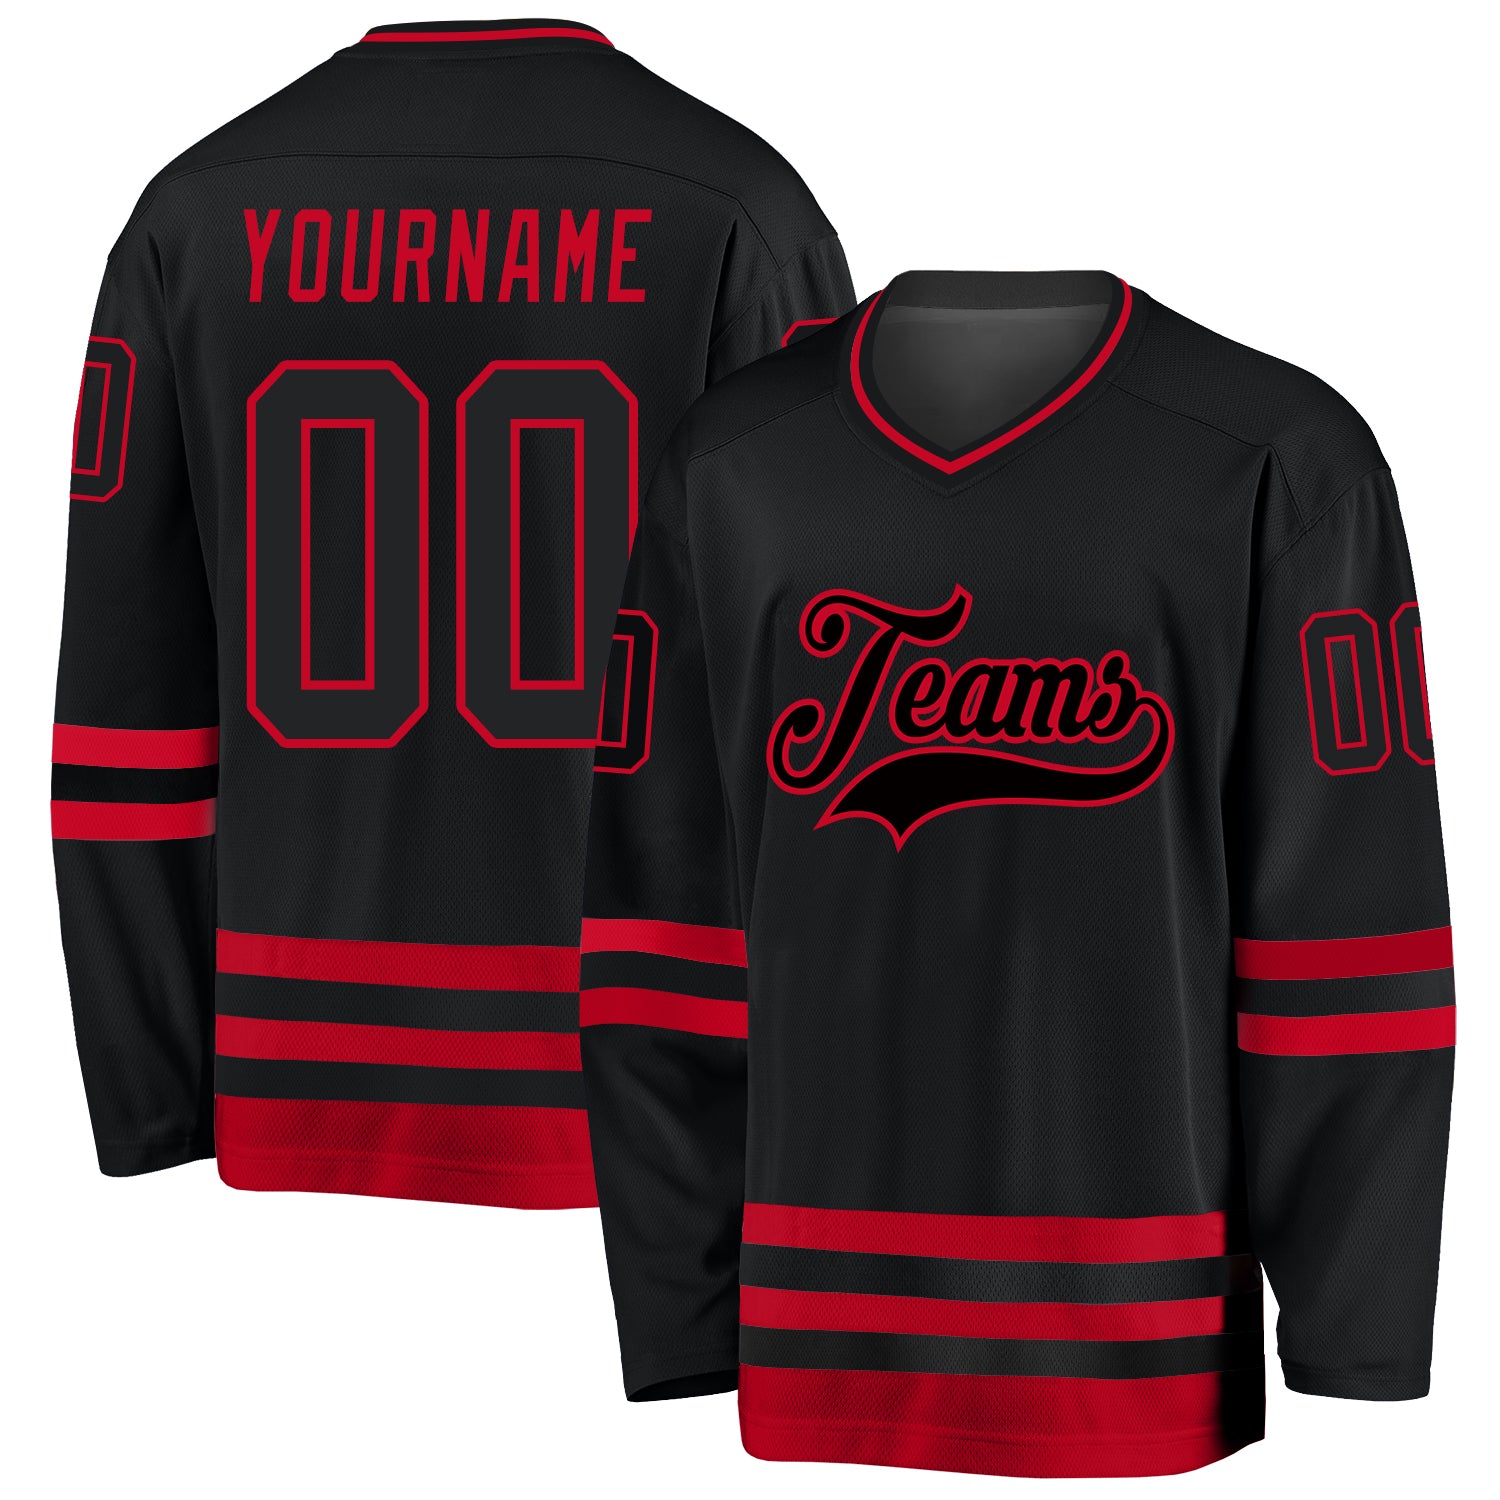 Authentic Youth Red Alternate Jersey - Hockey Customized